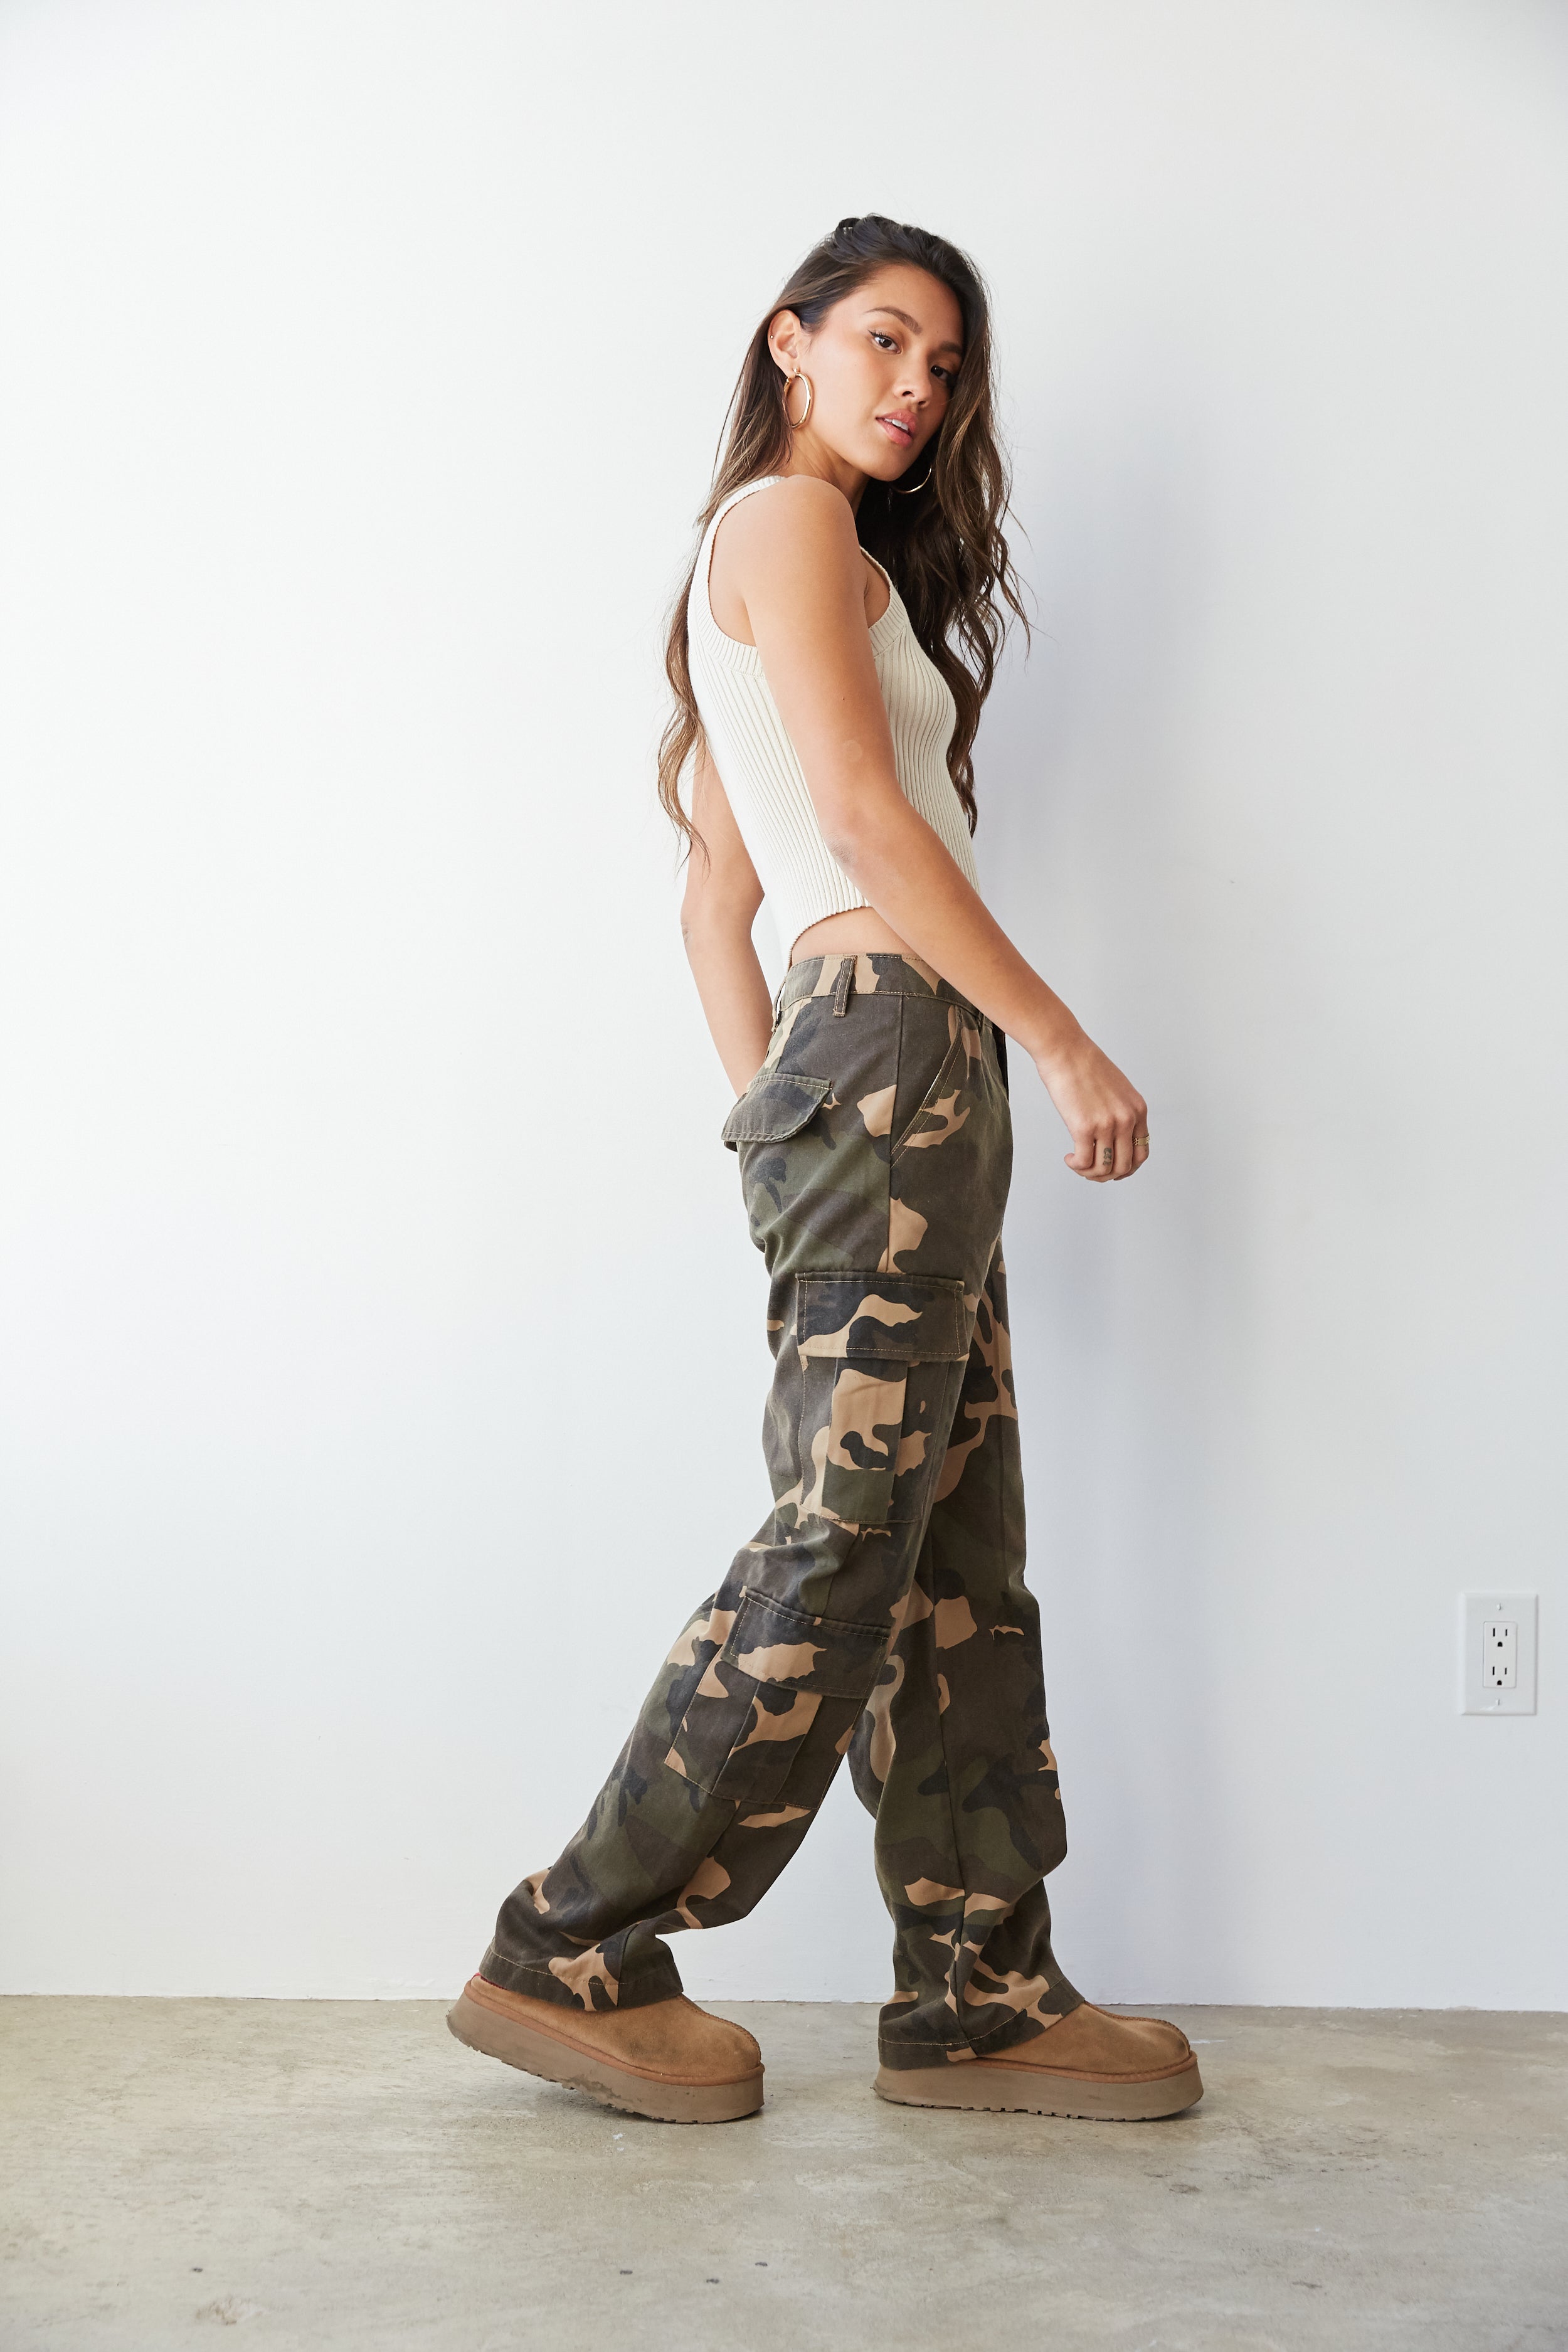 Womens baggy camo pants outfit | Army Pants Outfit | Camo Pants, cargo pants,  Military camouflage